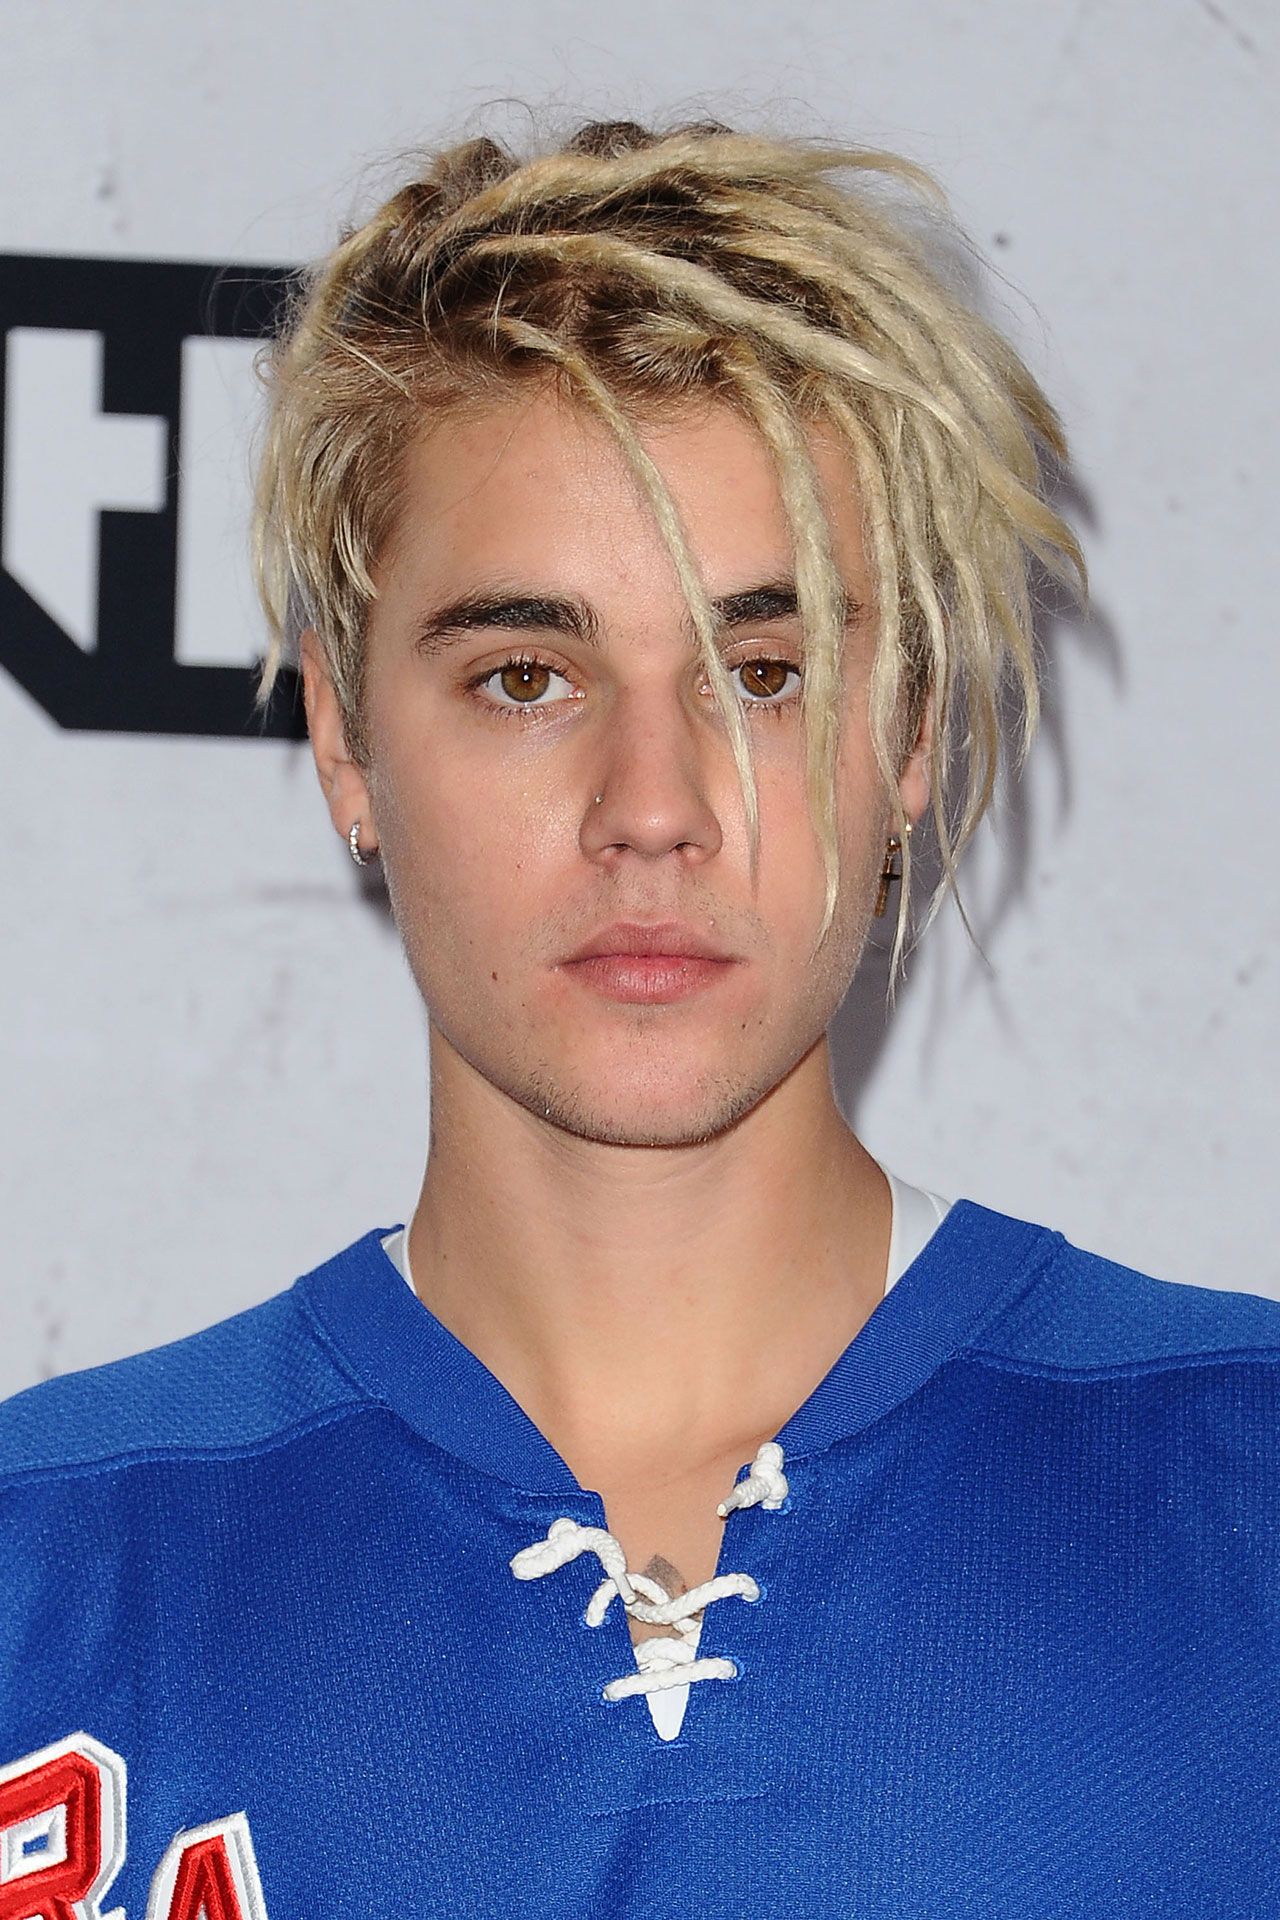 Hairstyle Of The Month #4 – Justin Bieber's Buzz Cut | ASOS-hkpdtq2012.edu.vn